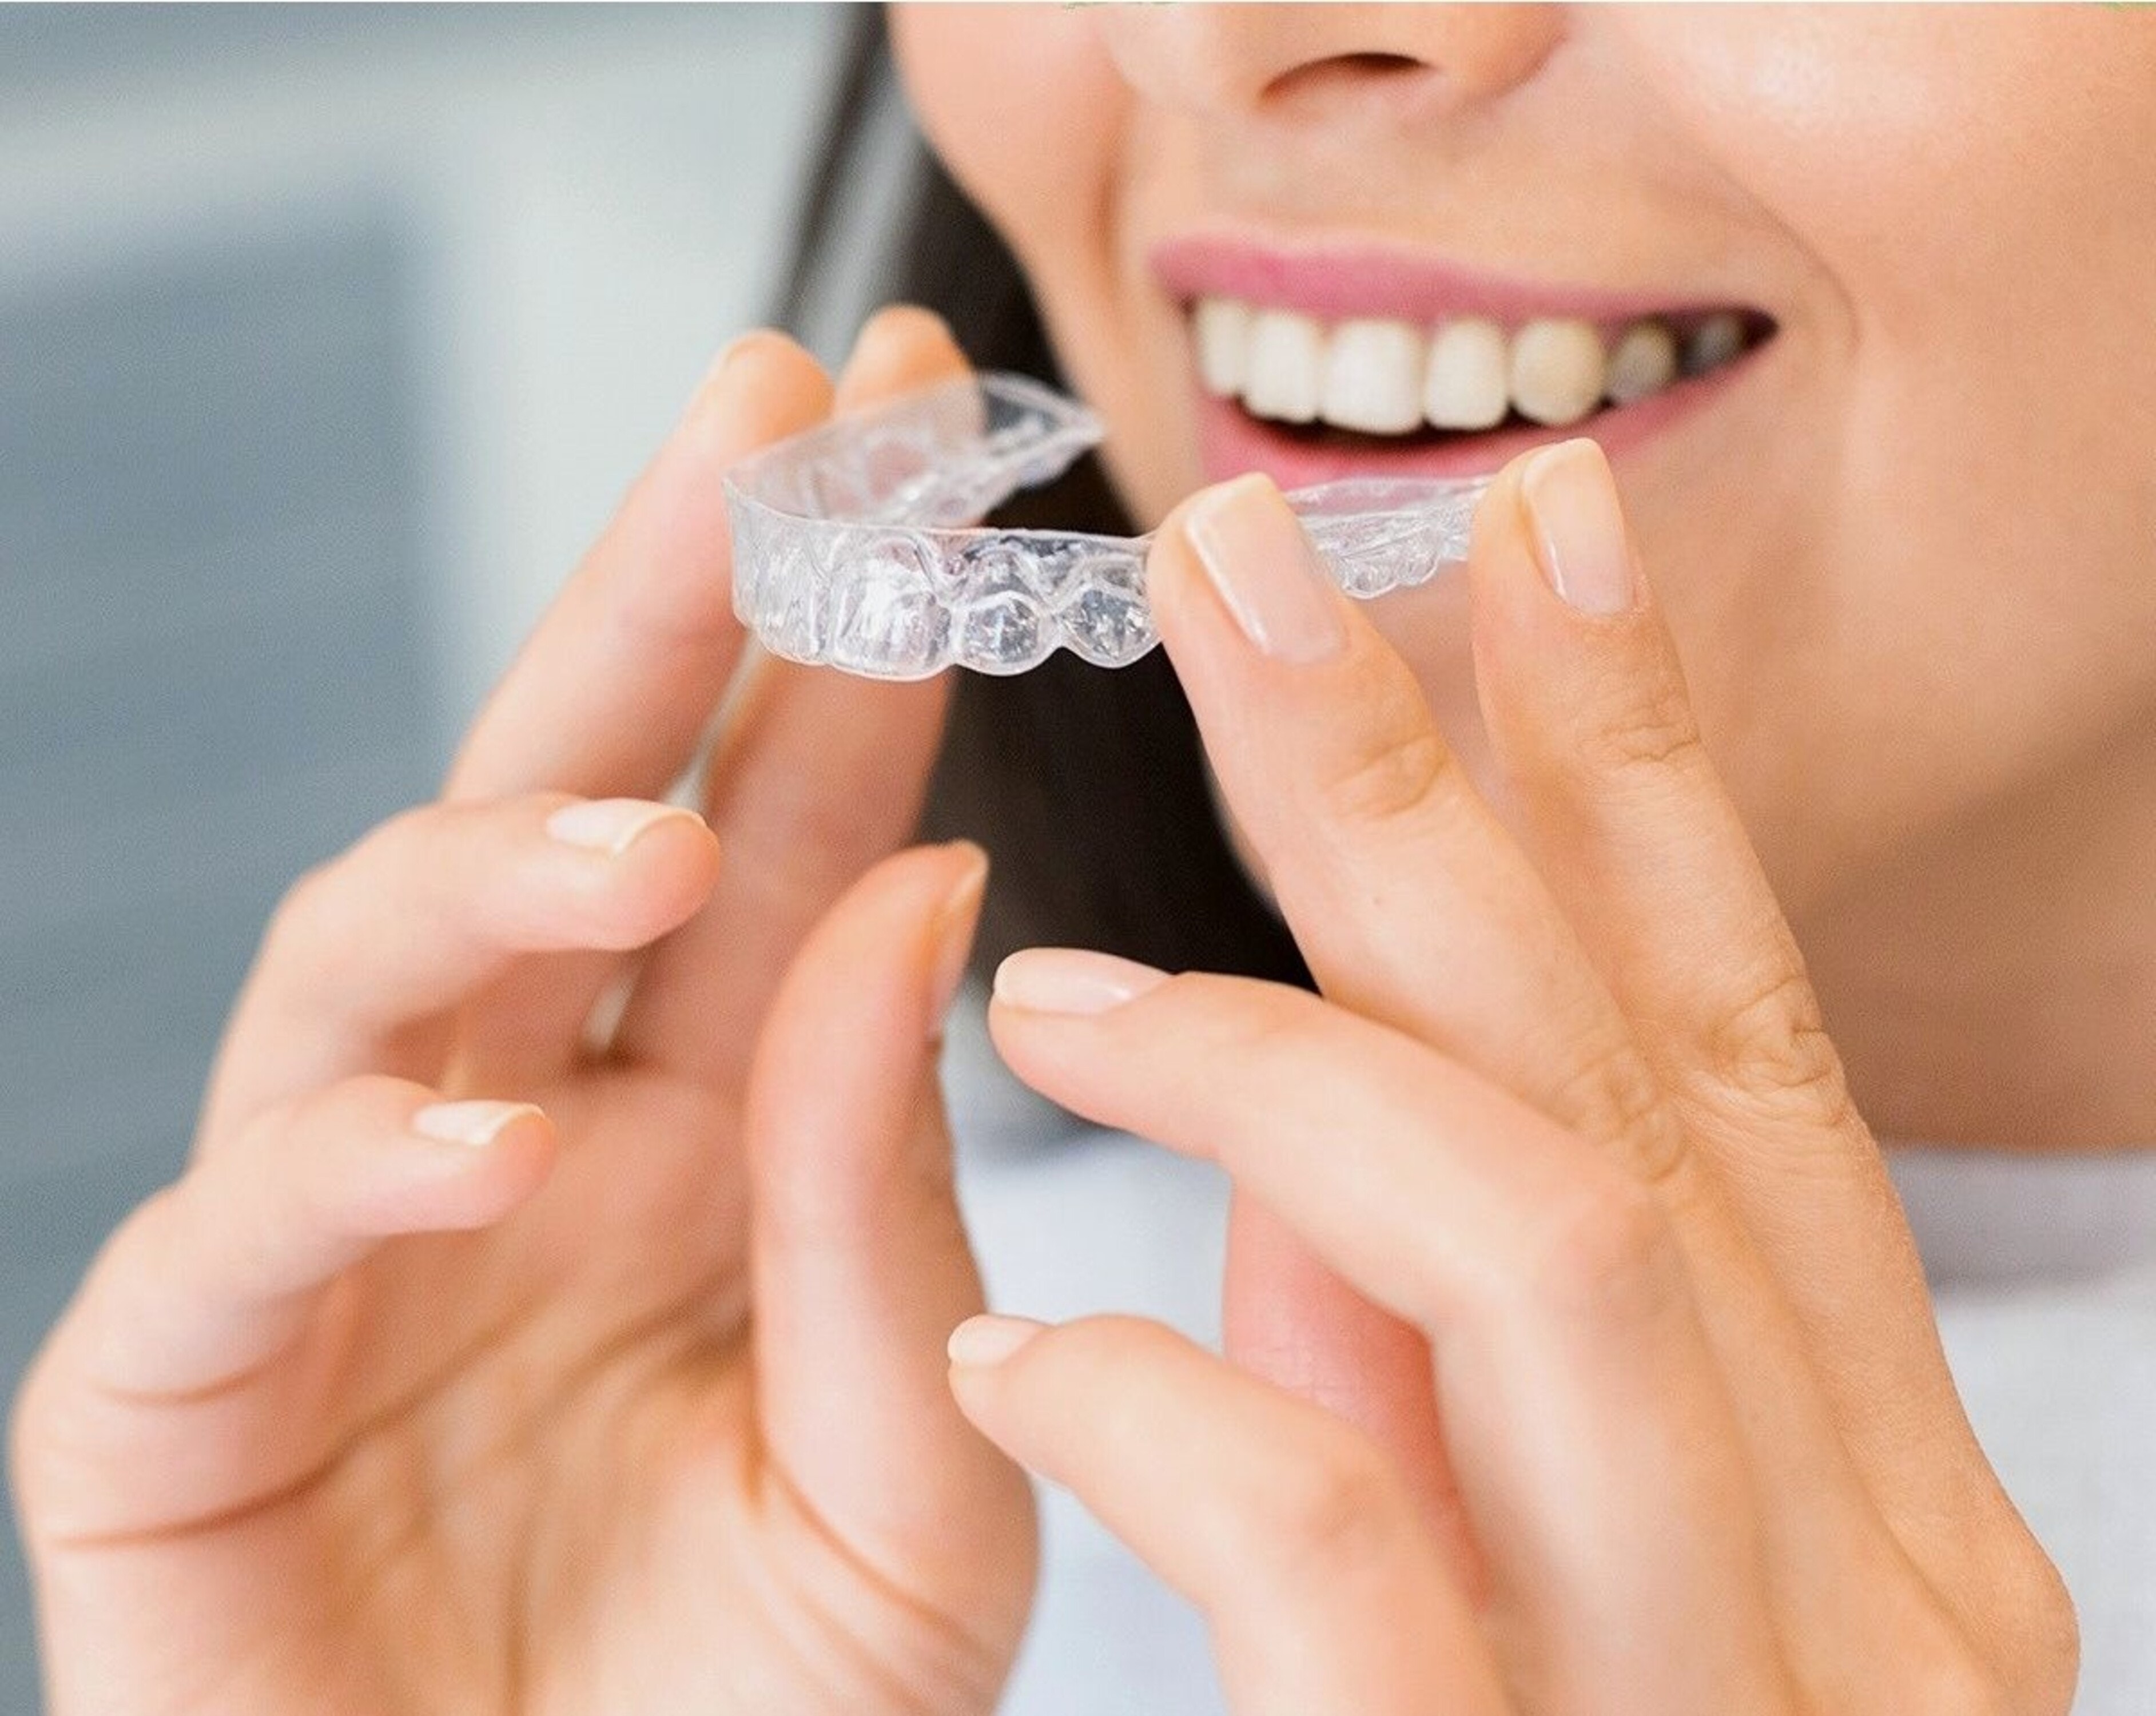 How to Clean Invisalign: Dos and Don'ts for Invisalign Wearers